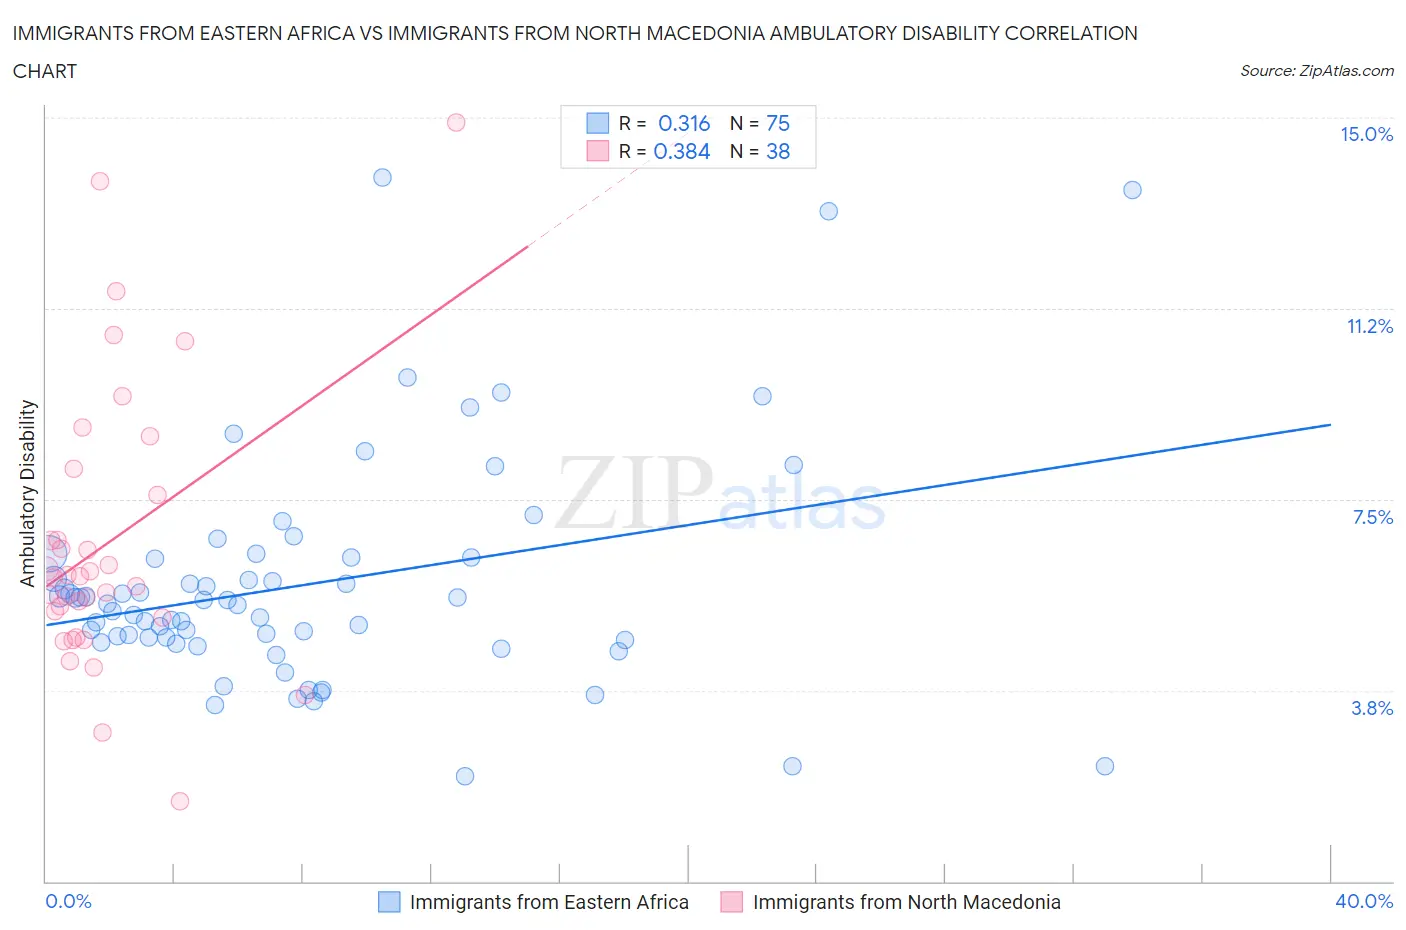 Immigrants from Eastern Africa vs Immigrants from North Macedonia Ambulatory Disability